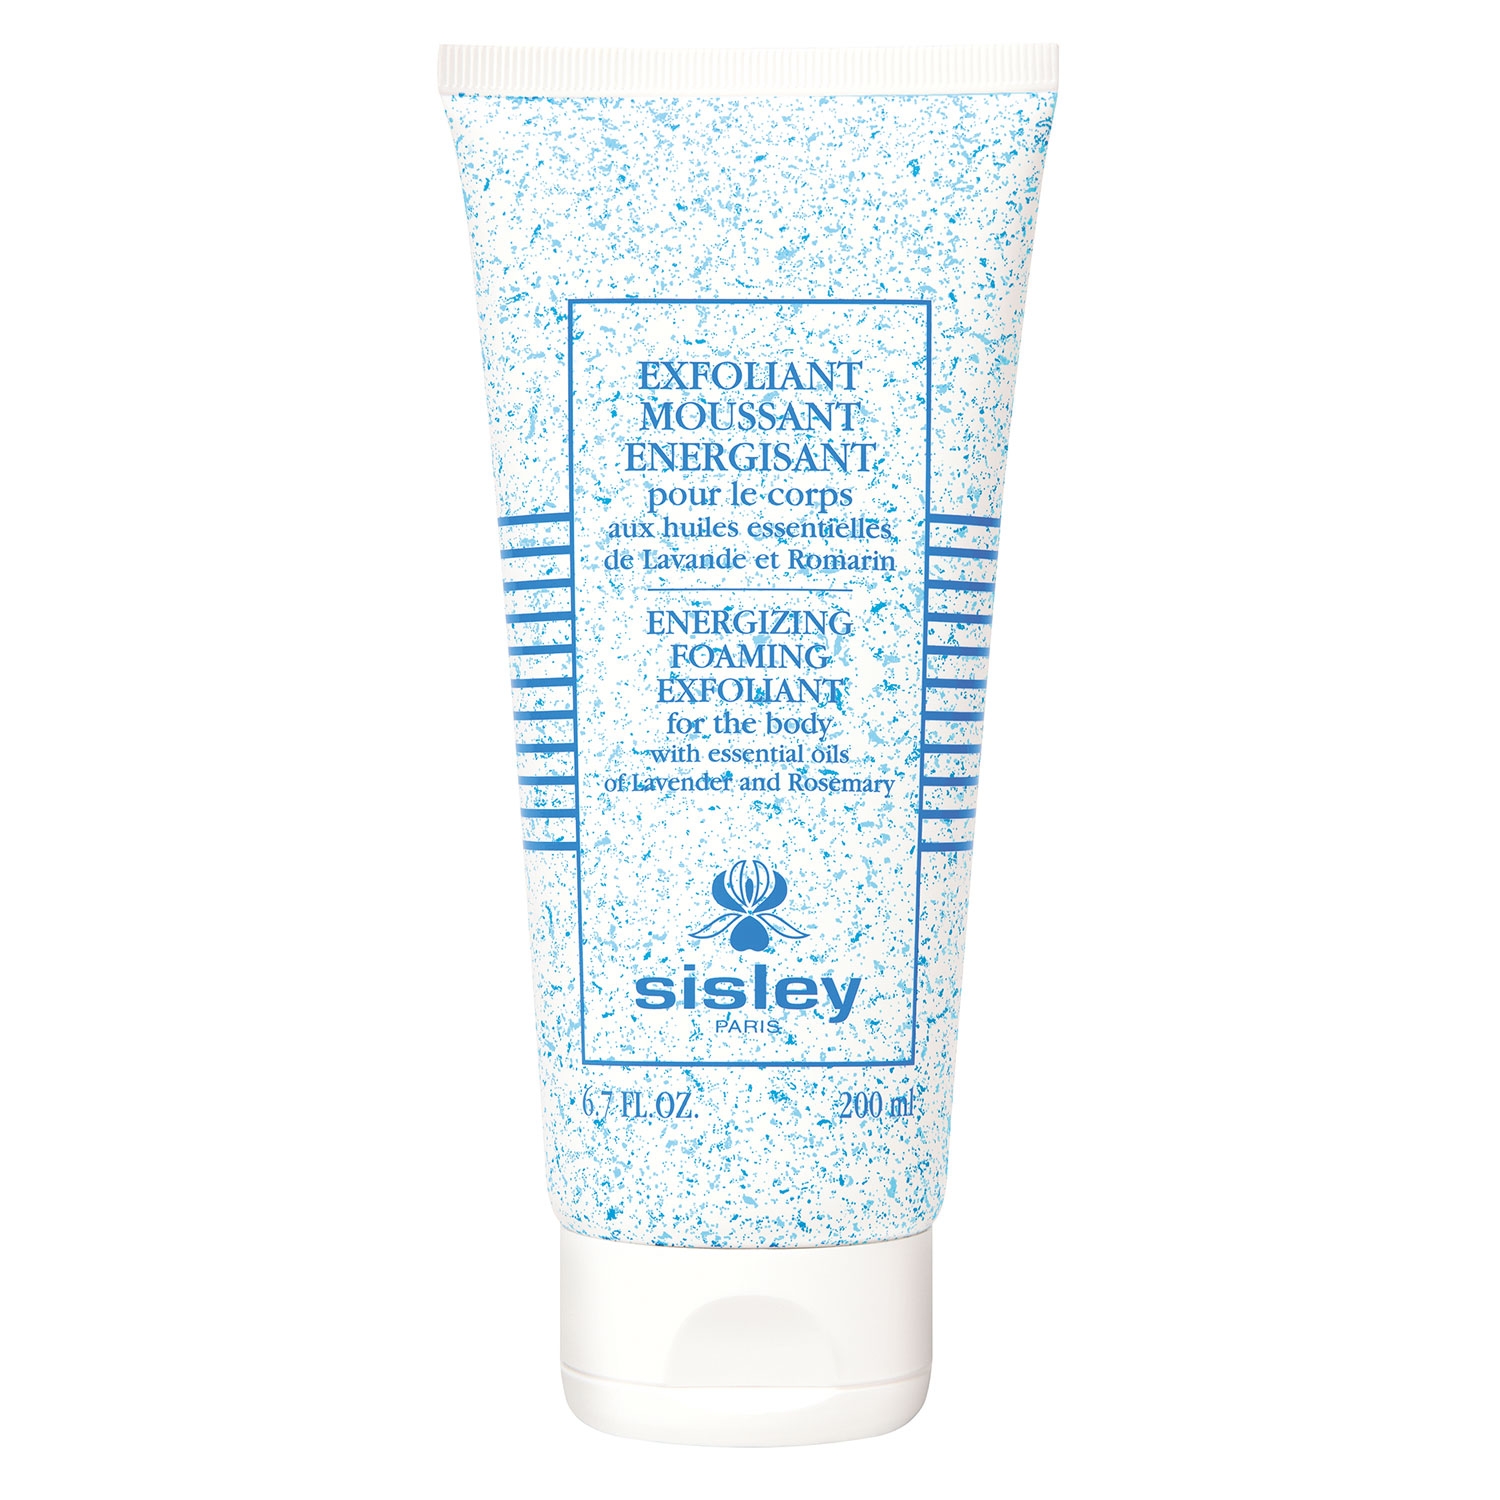 Product image from Sisley Skincare - Exfoliant Moussant Energisant pour le corps